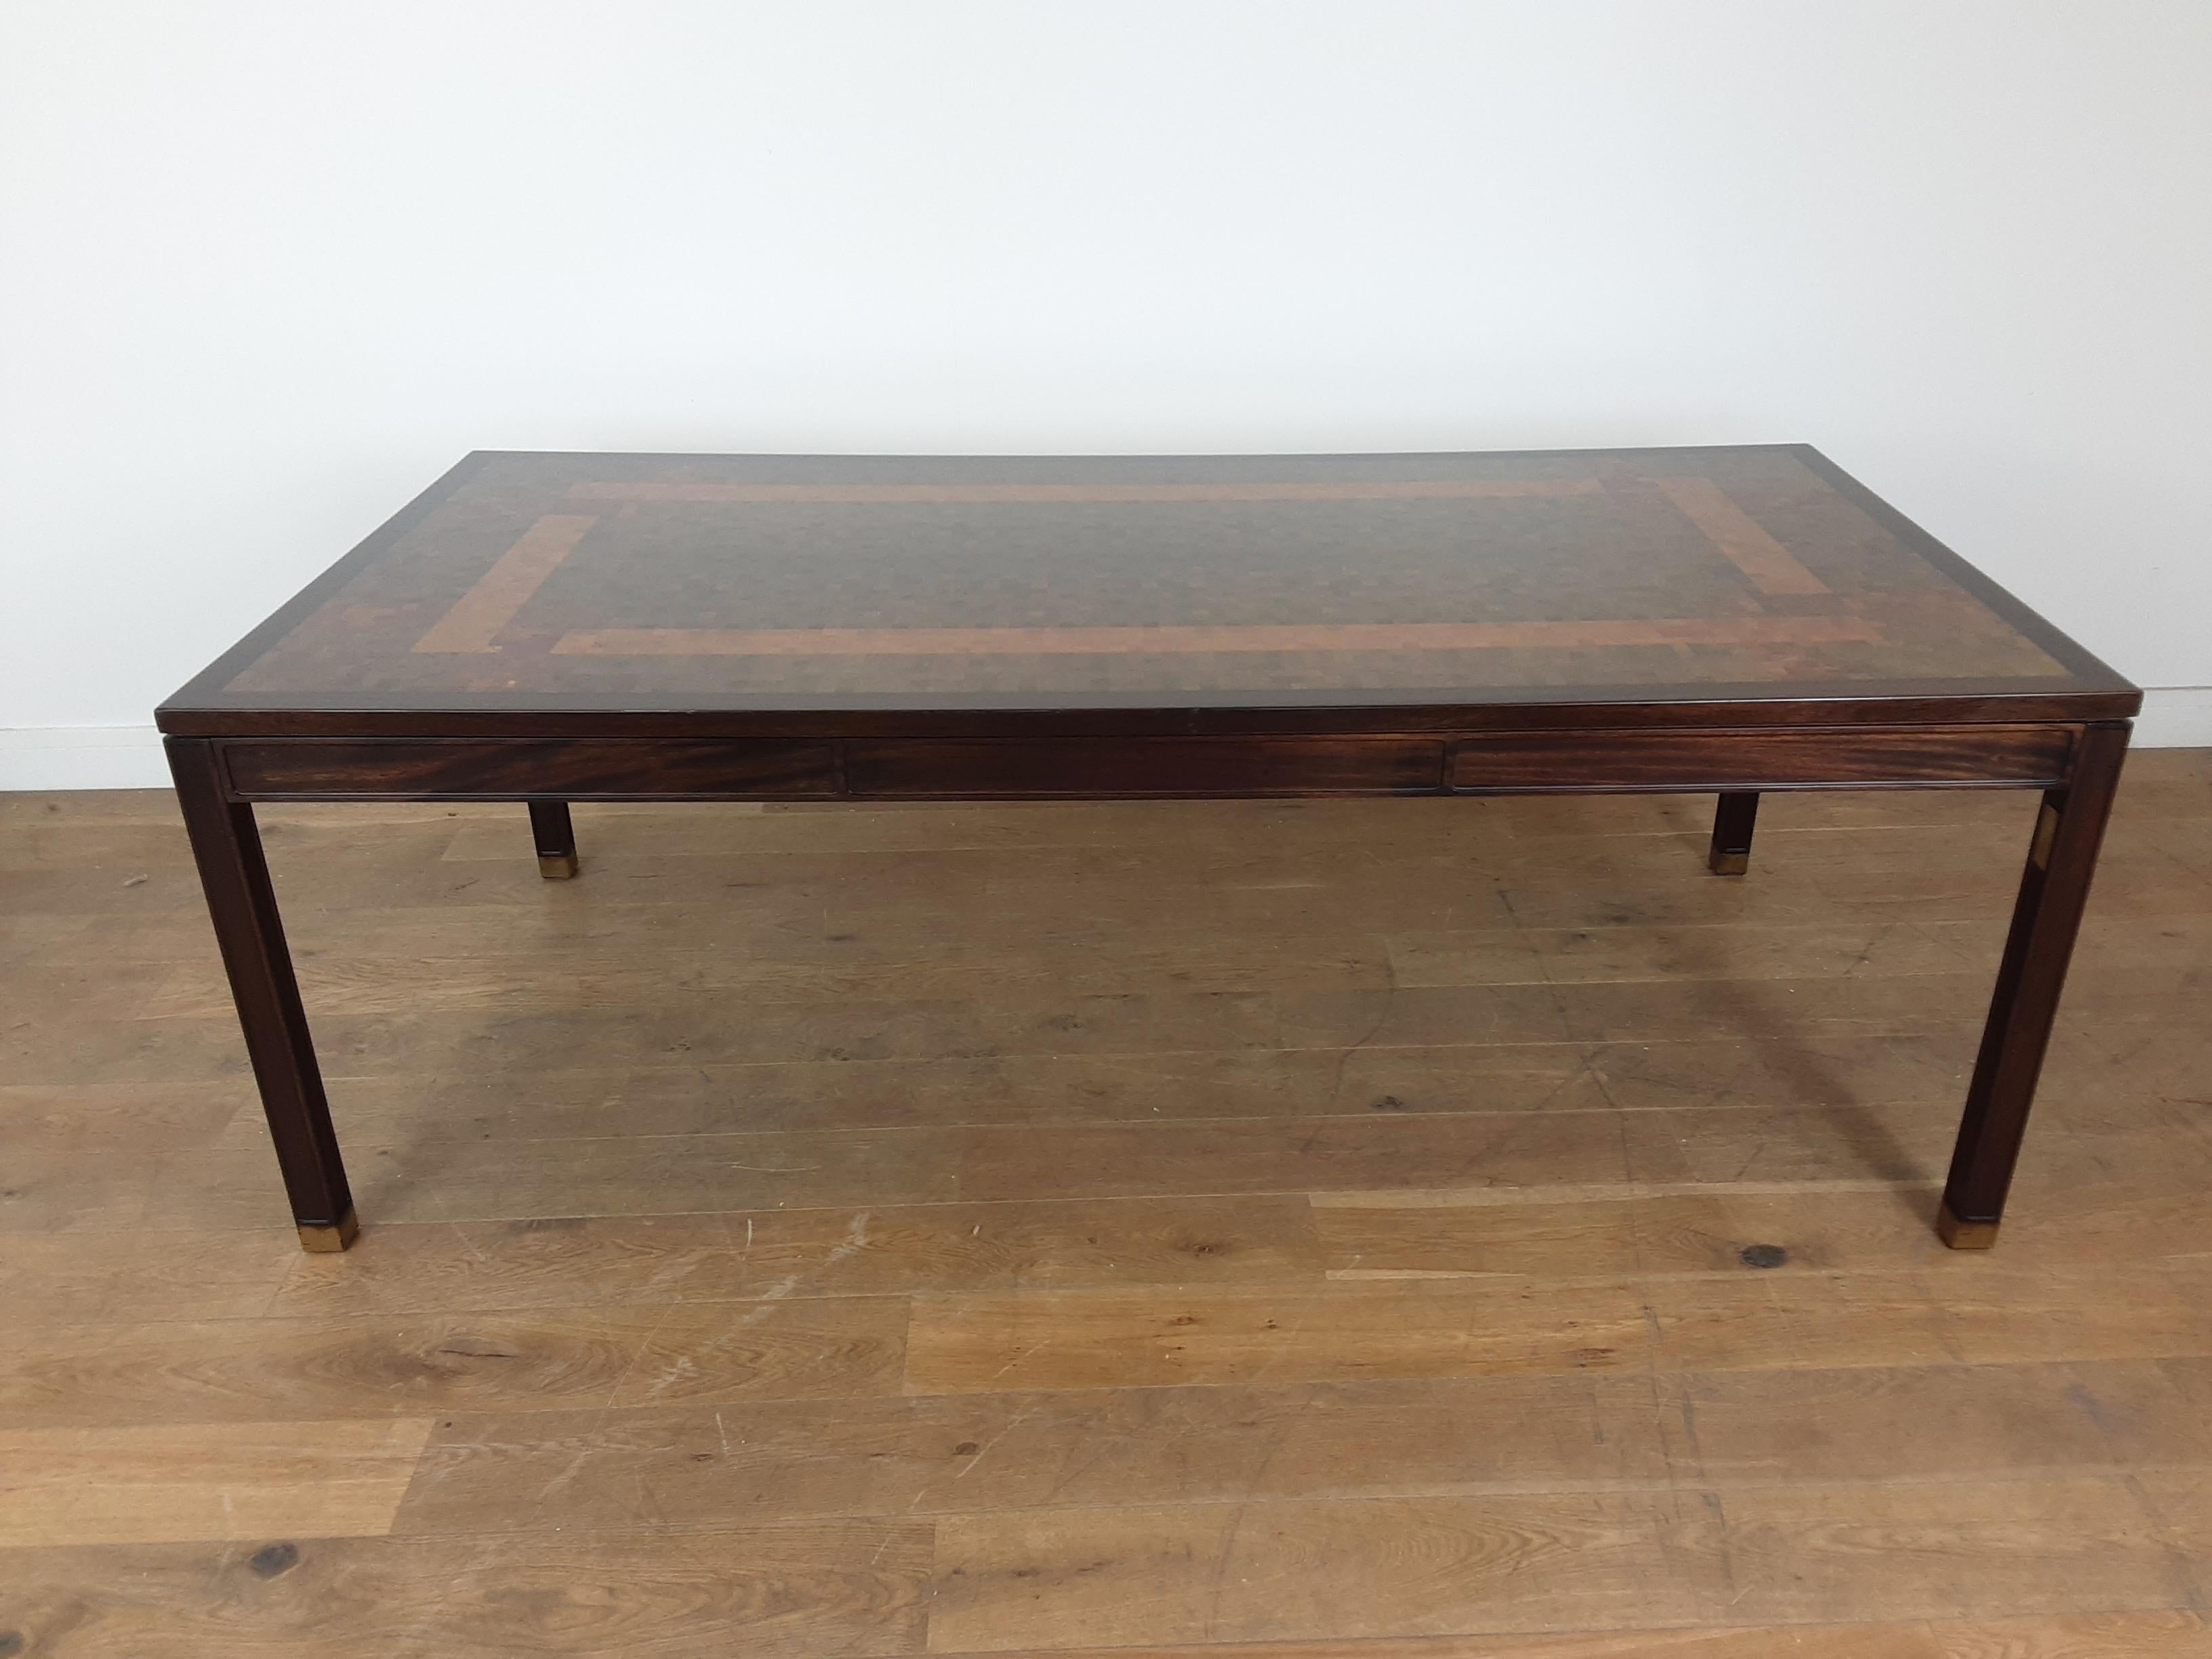 Stunning large midcentury dining or work table with beautiful fruit woods forming a mosaic and cross band design.
in a strong and paneled mahogany frame the feet finished with polished brass.
produced by Tranekaer furniture with brass plate